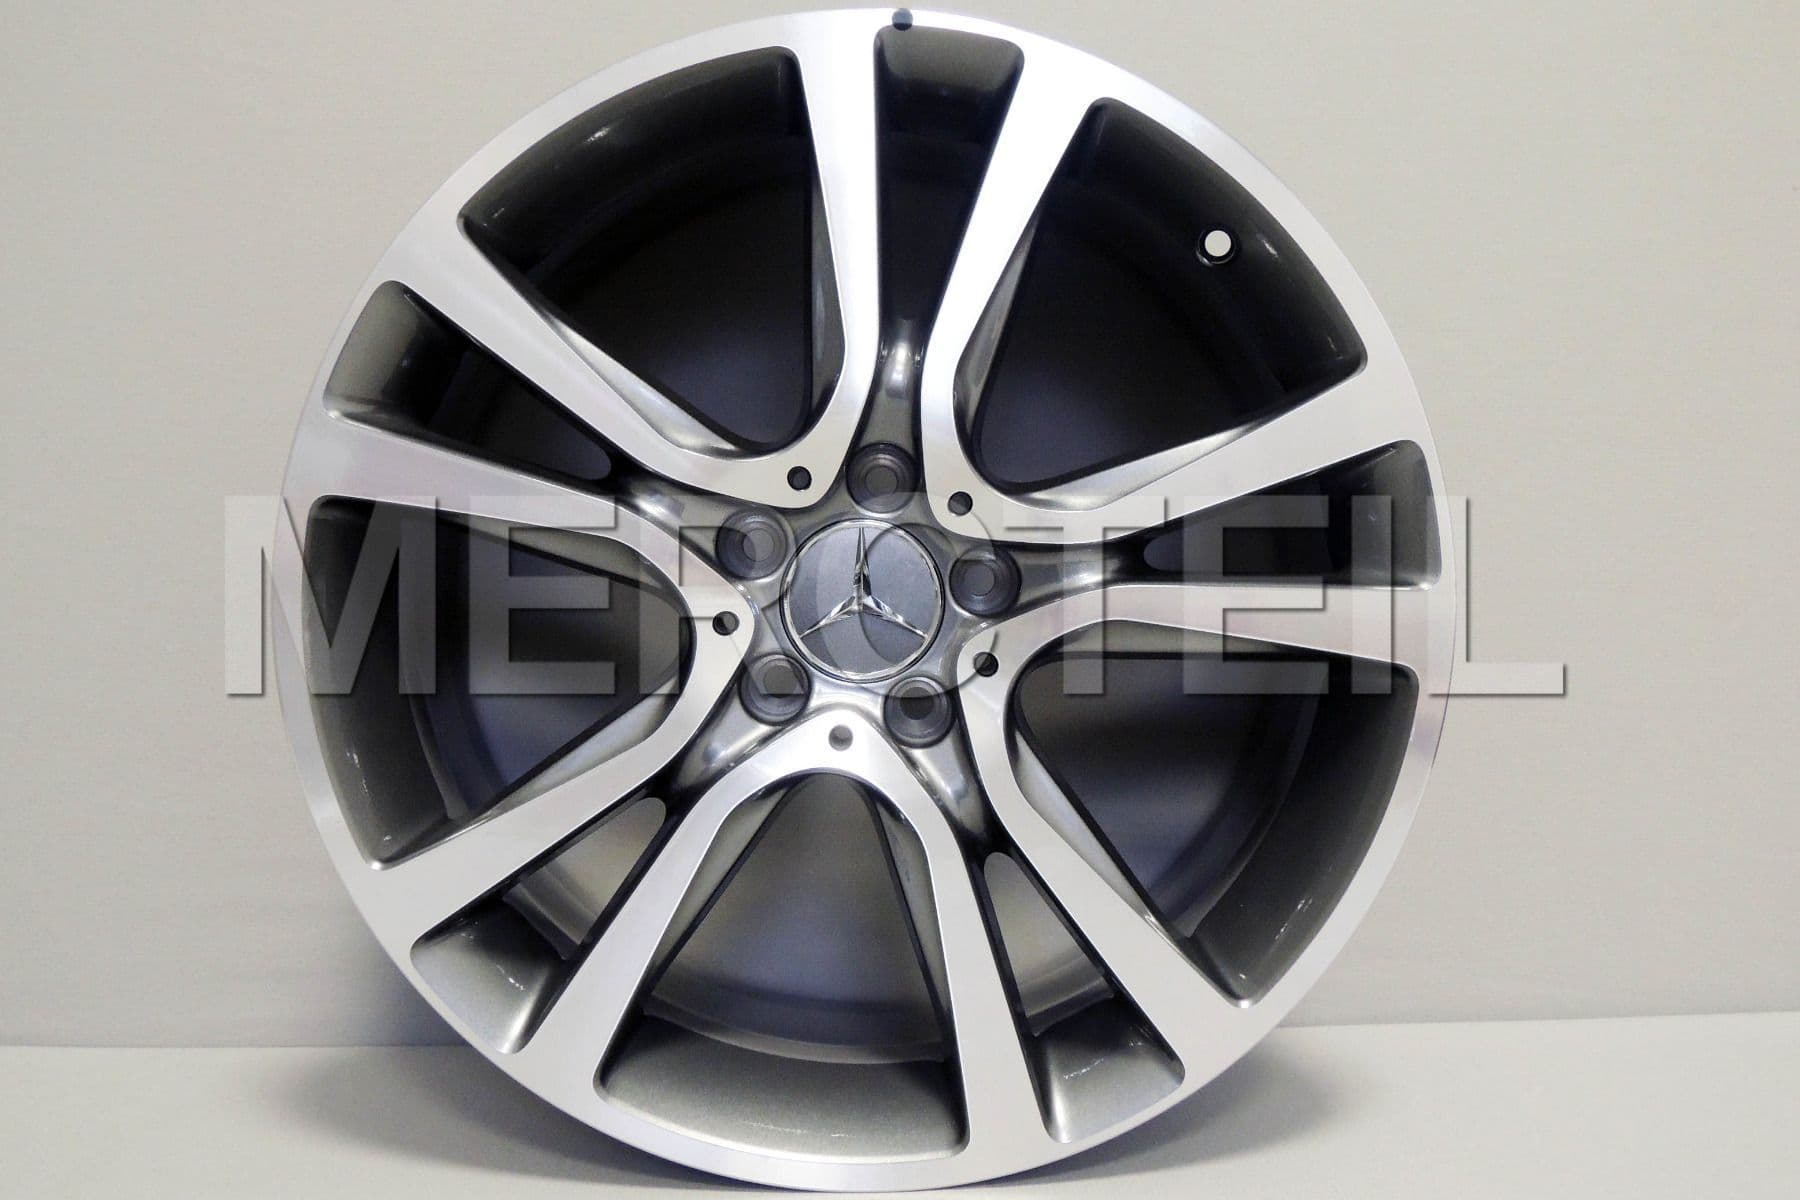 19 Inch Set Of Alloy Wheels for E Class W212 Part Number A21240148027X21, 2124014802 7X21.